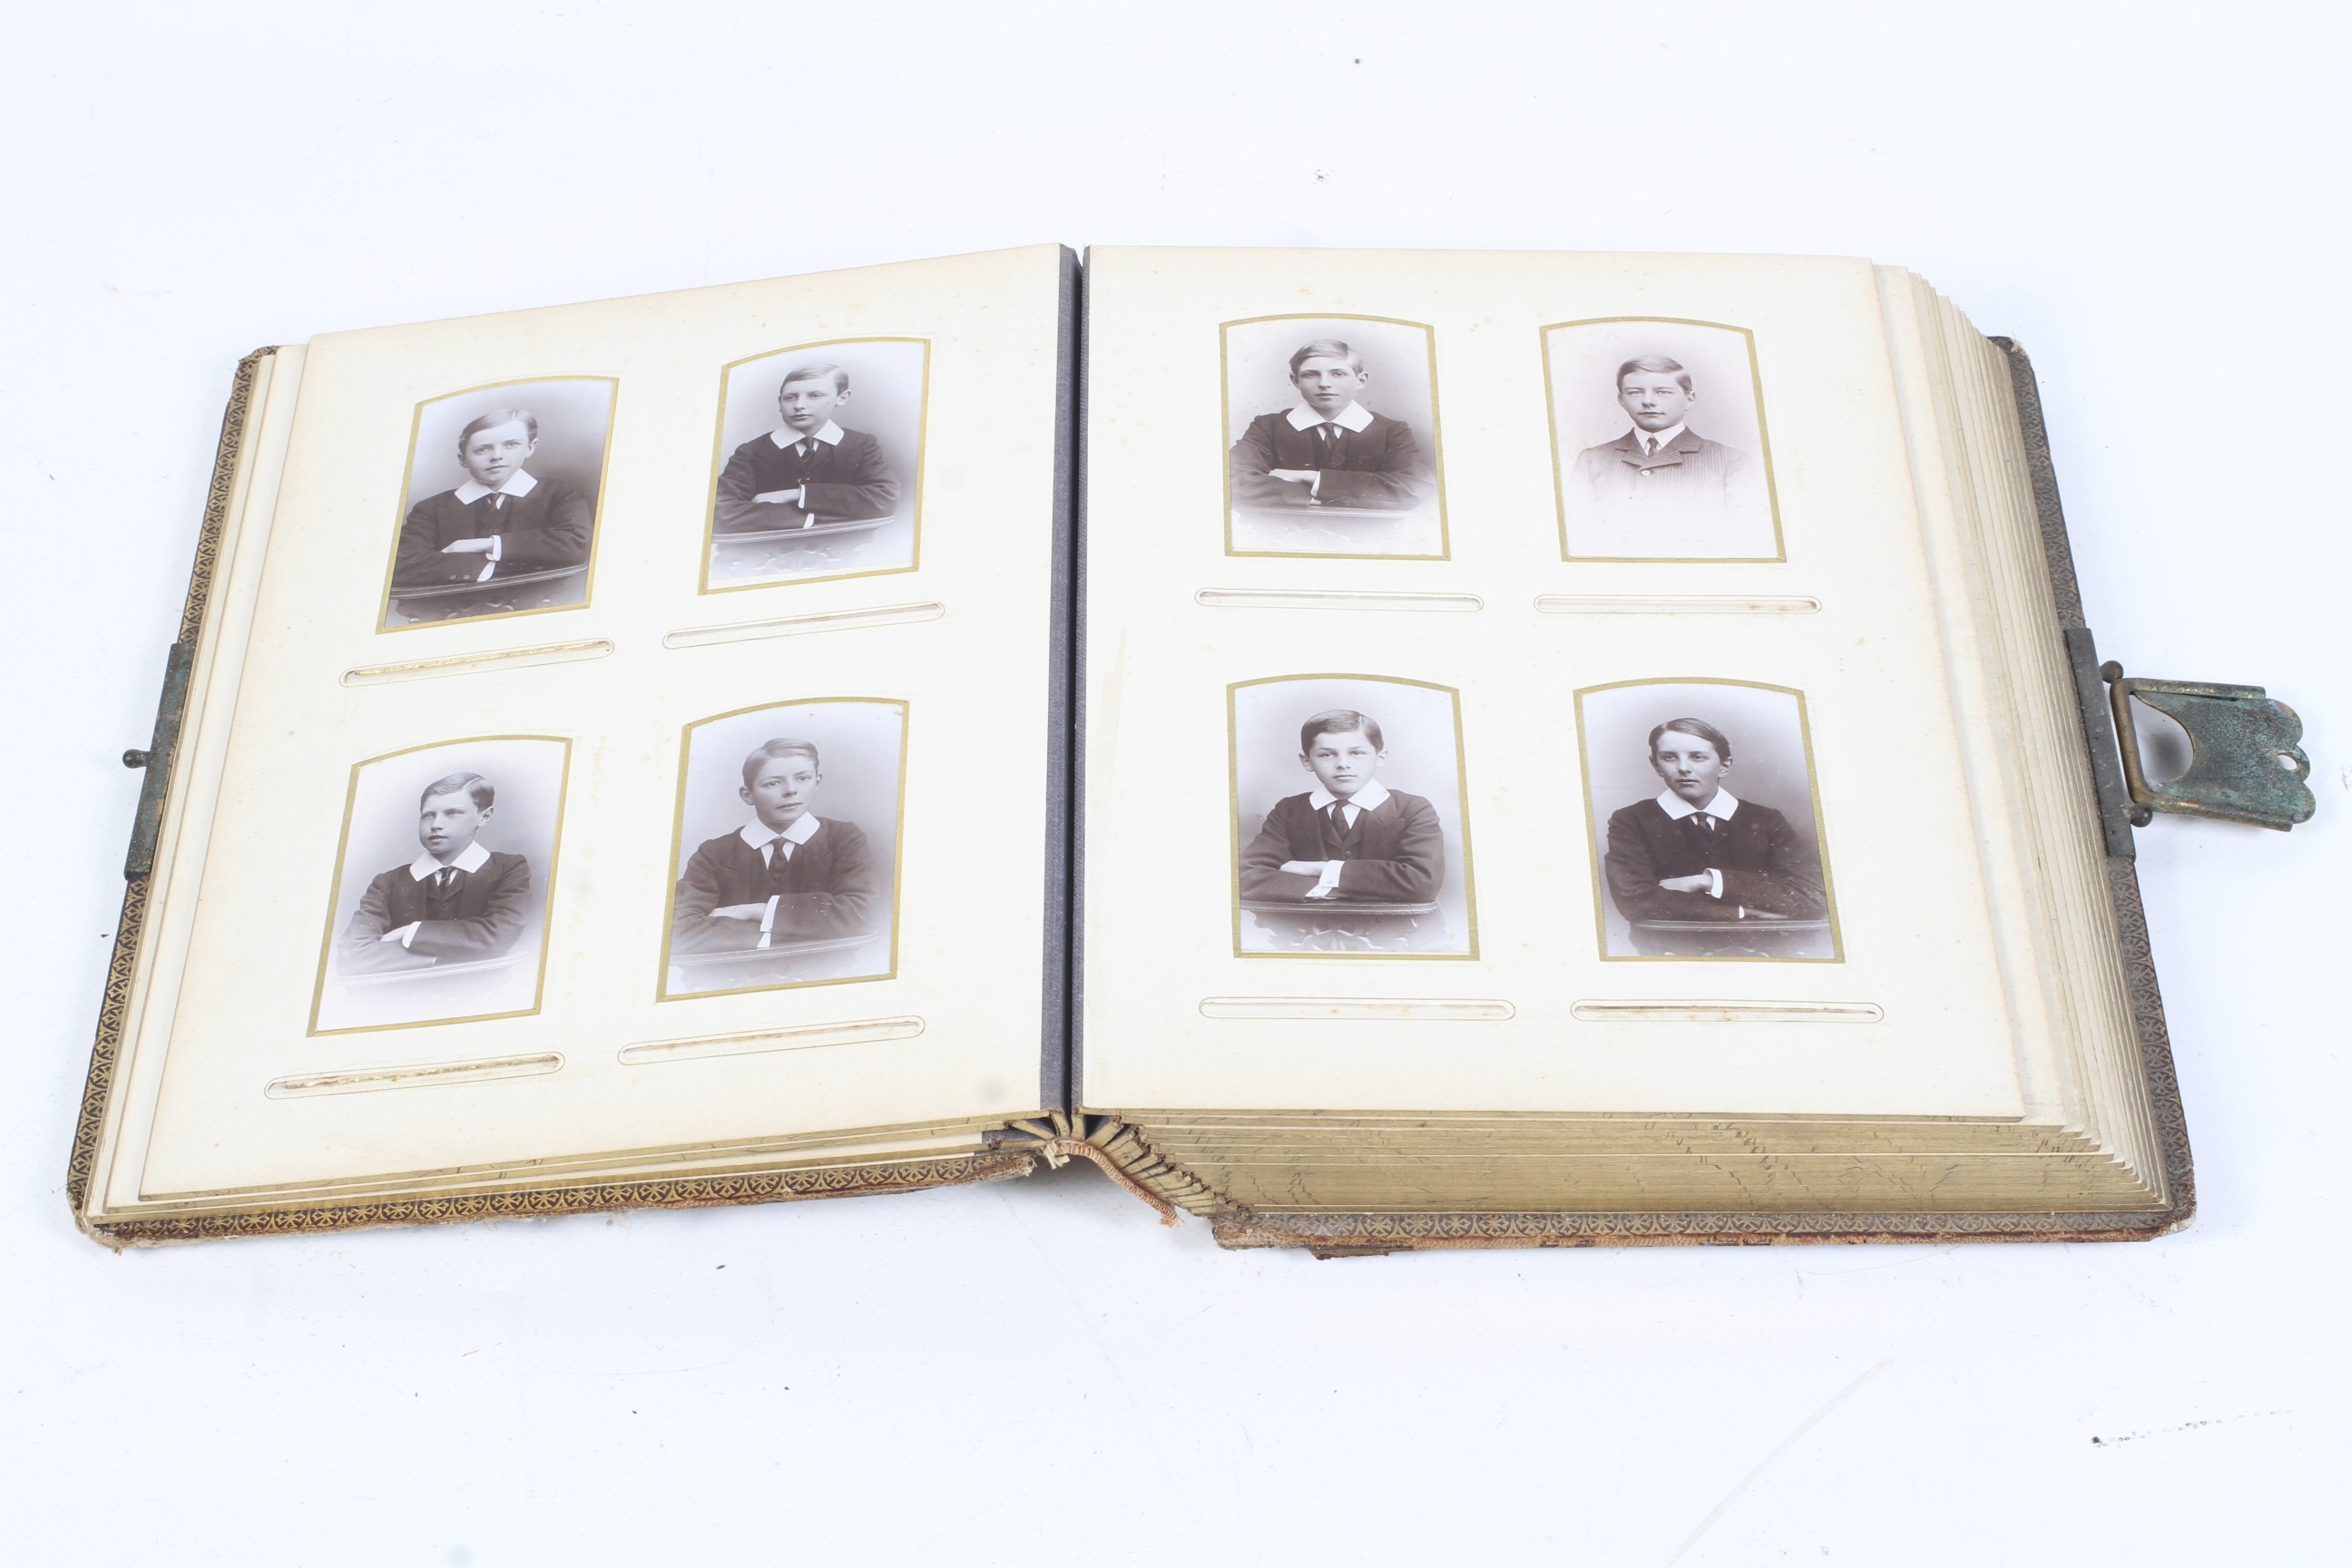 A 20th century photo album for The Class of 1905-1910 at Eton. - Image 2 of 3